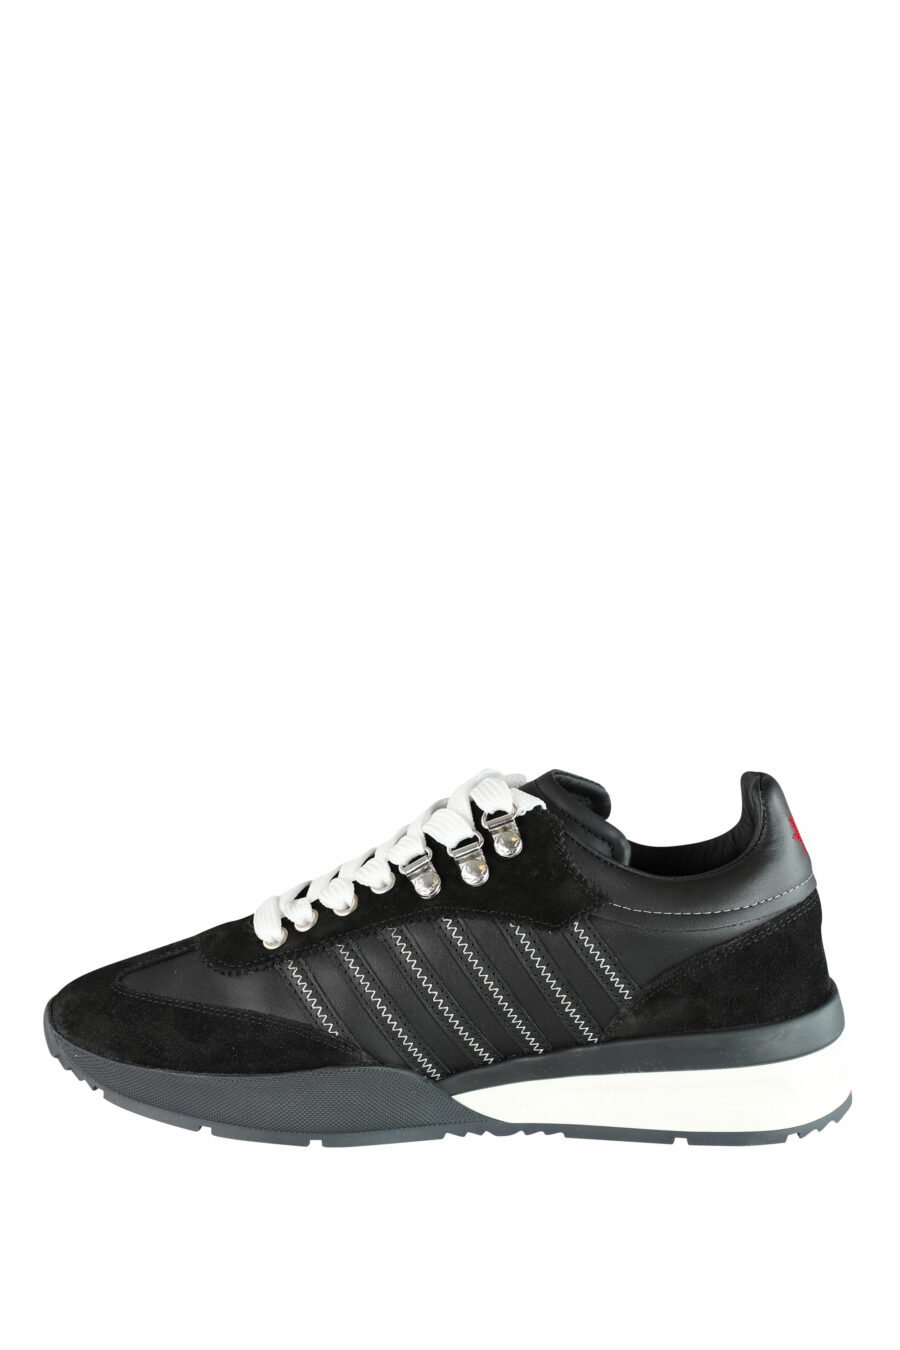 Original legend" black mix trainers with two-tone sole and diagonal lines - IMG 1484